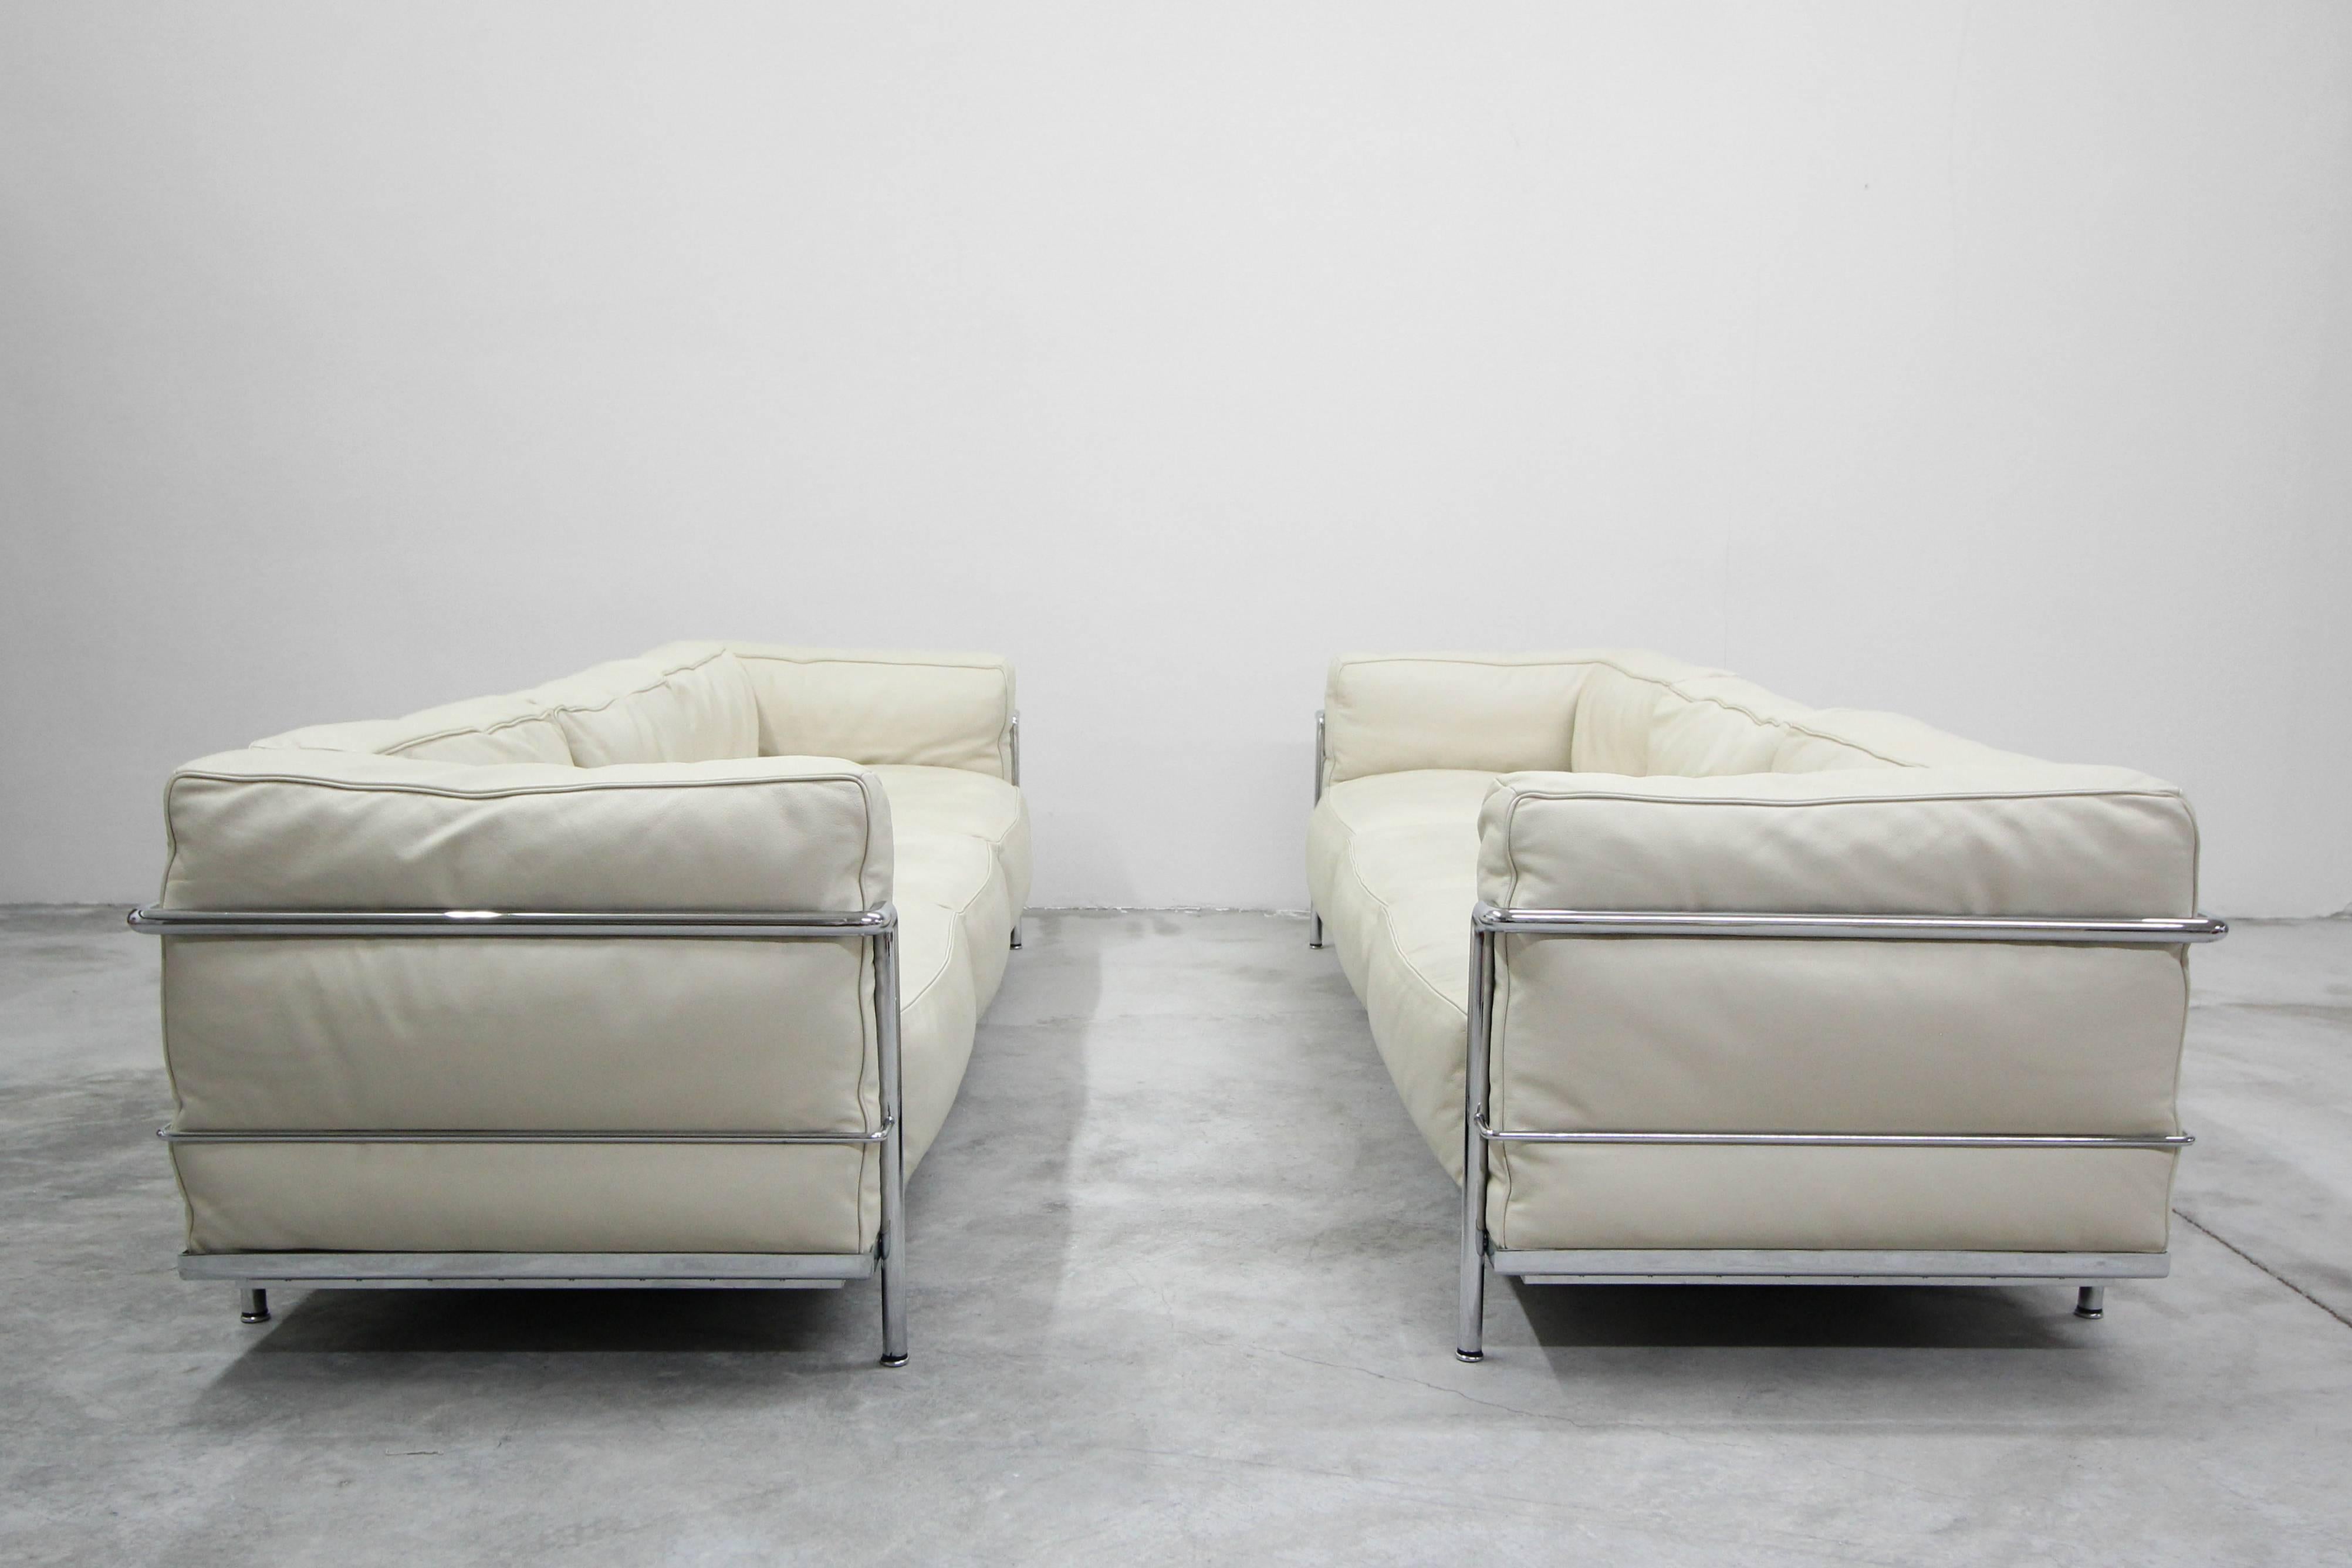 A rare pair of LC3 Grand Modele sofas designed by Le Corbusier, Pierre Jeanneret and Charlotte Perriand, produced by Cassina. Designed in 1928, but still being manufactured today, the LC3 is proof that great design is timeless.

Seize your